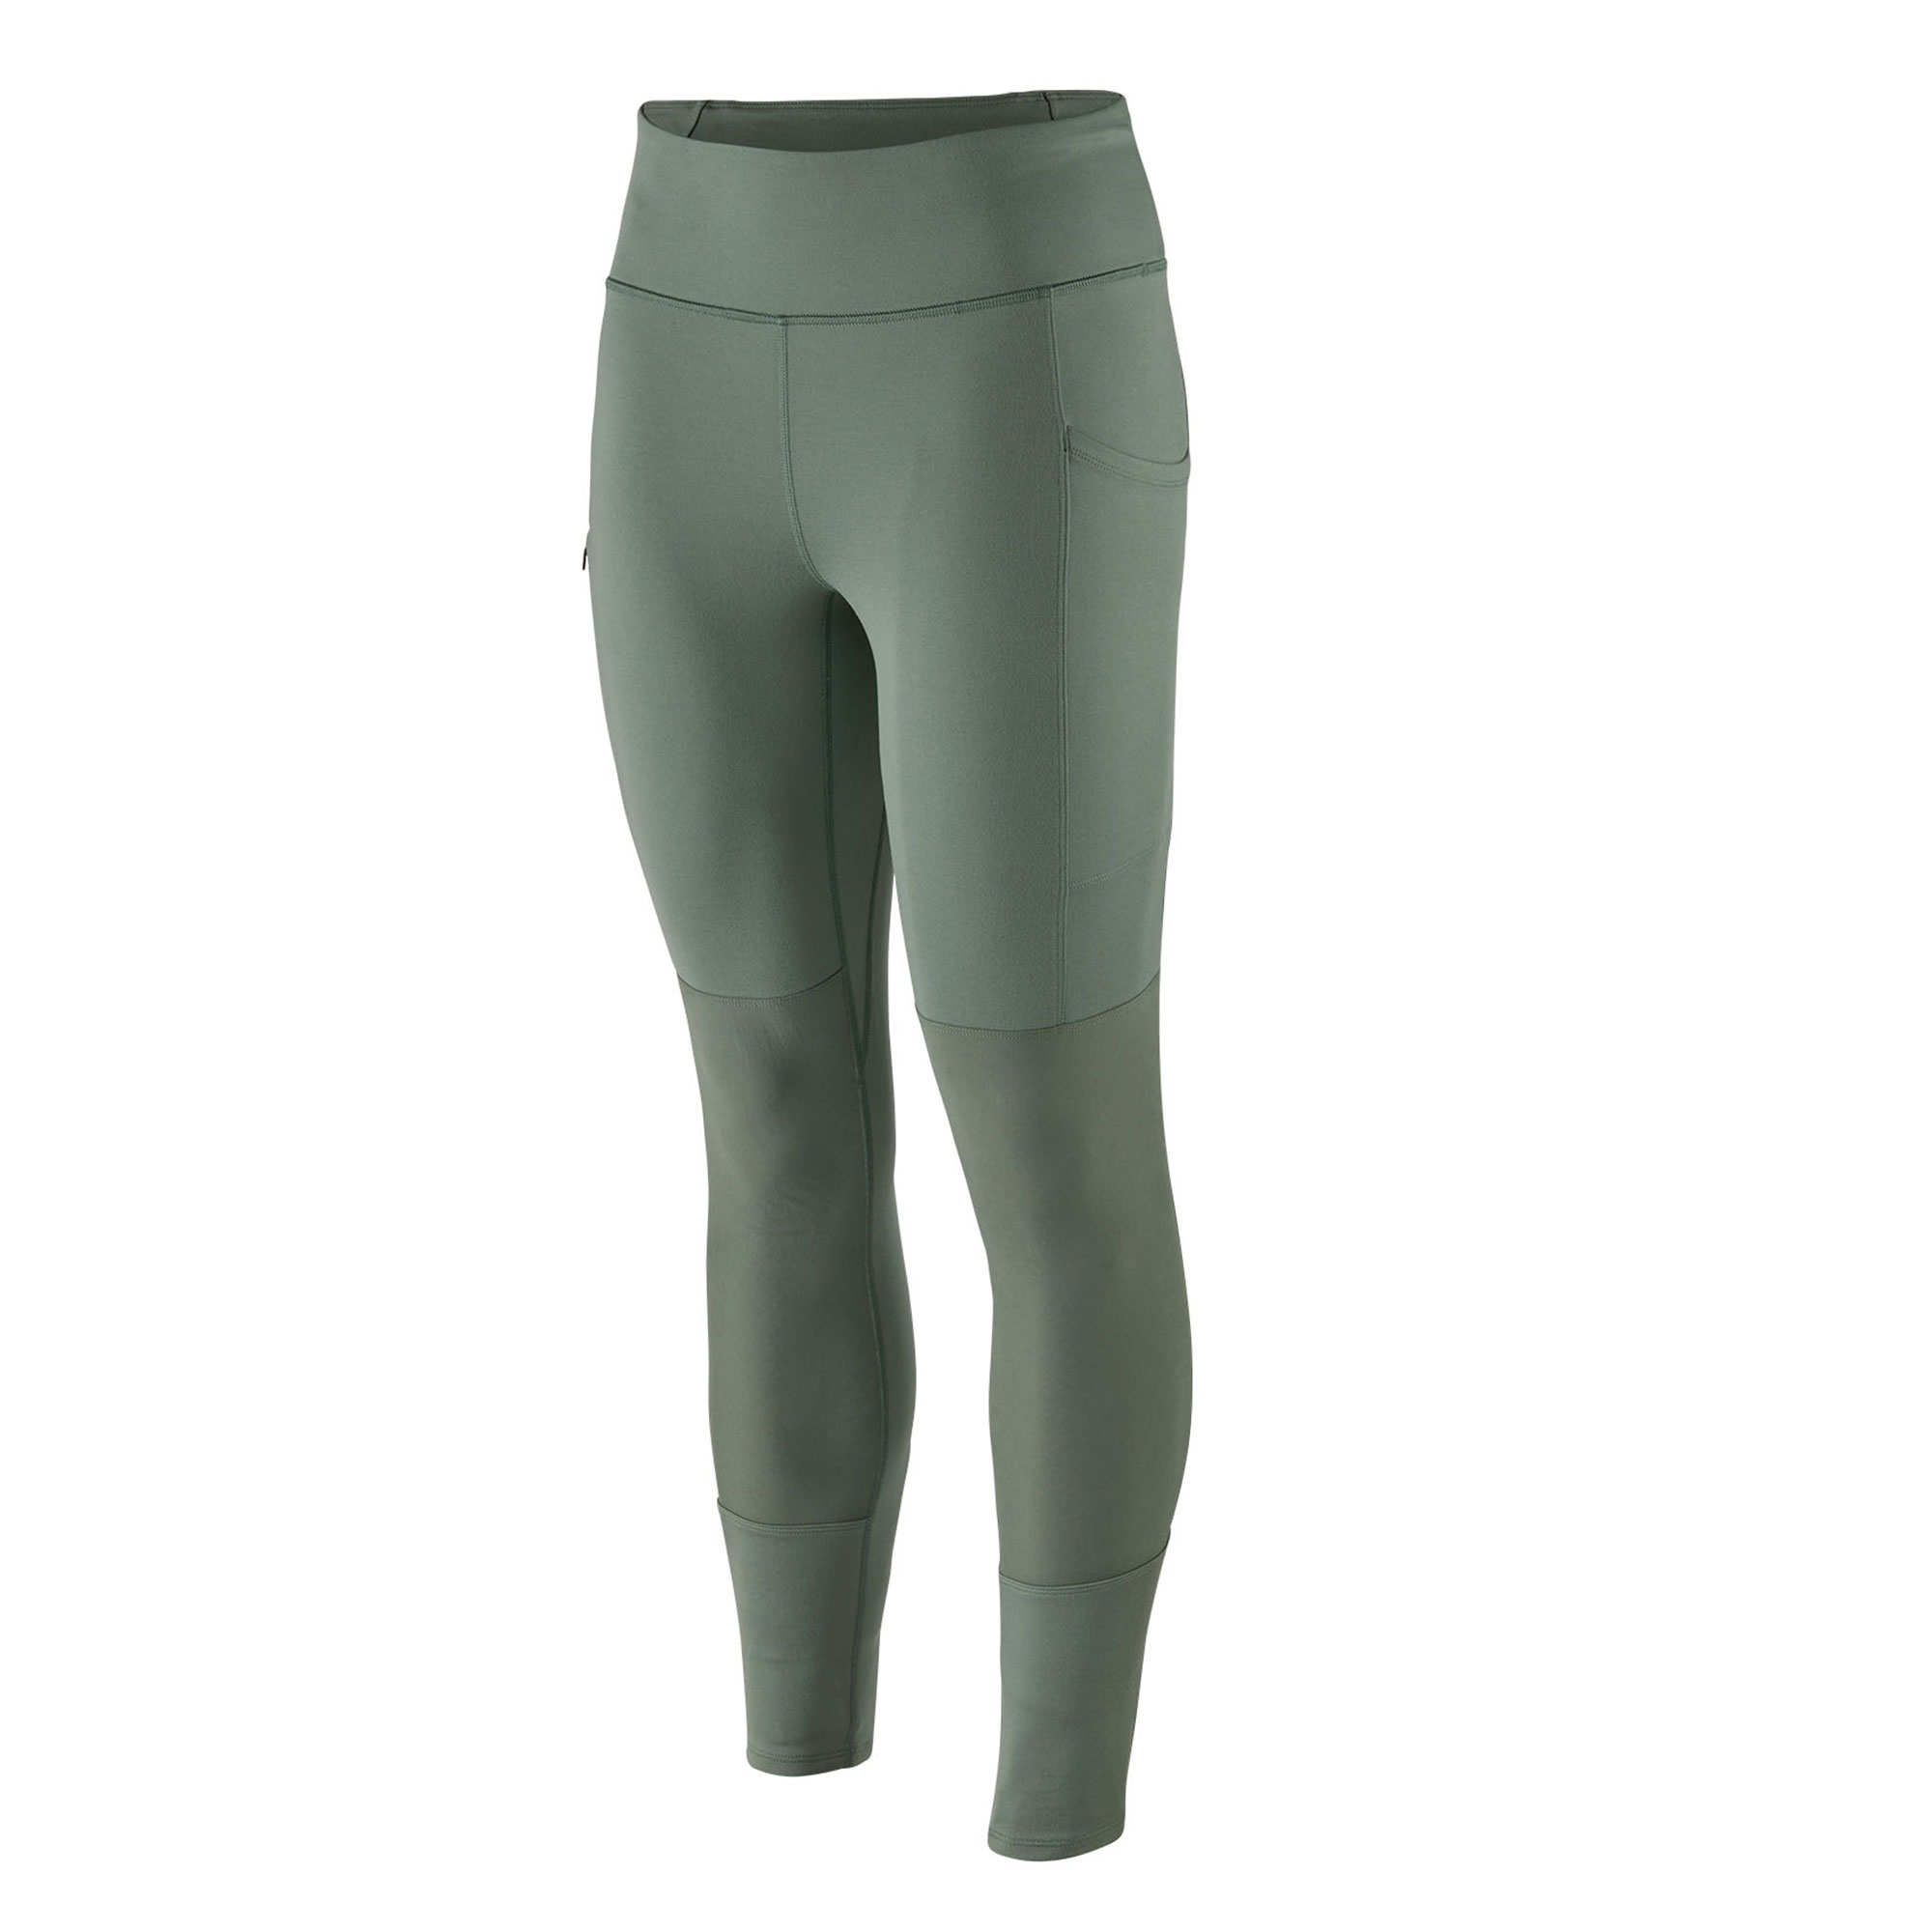 Patagonia Leggings Review: Perfect for Running, Hiking, and Yoga